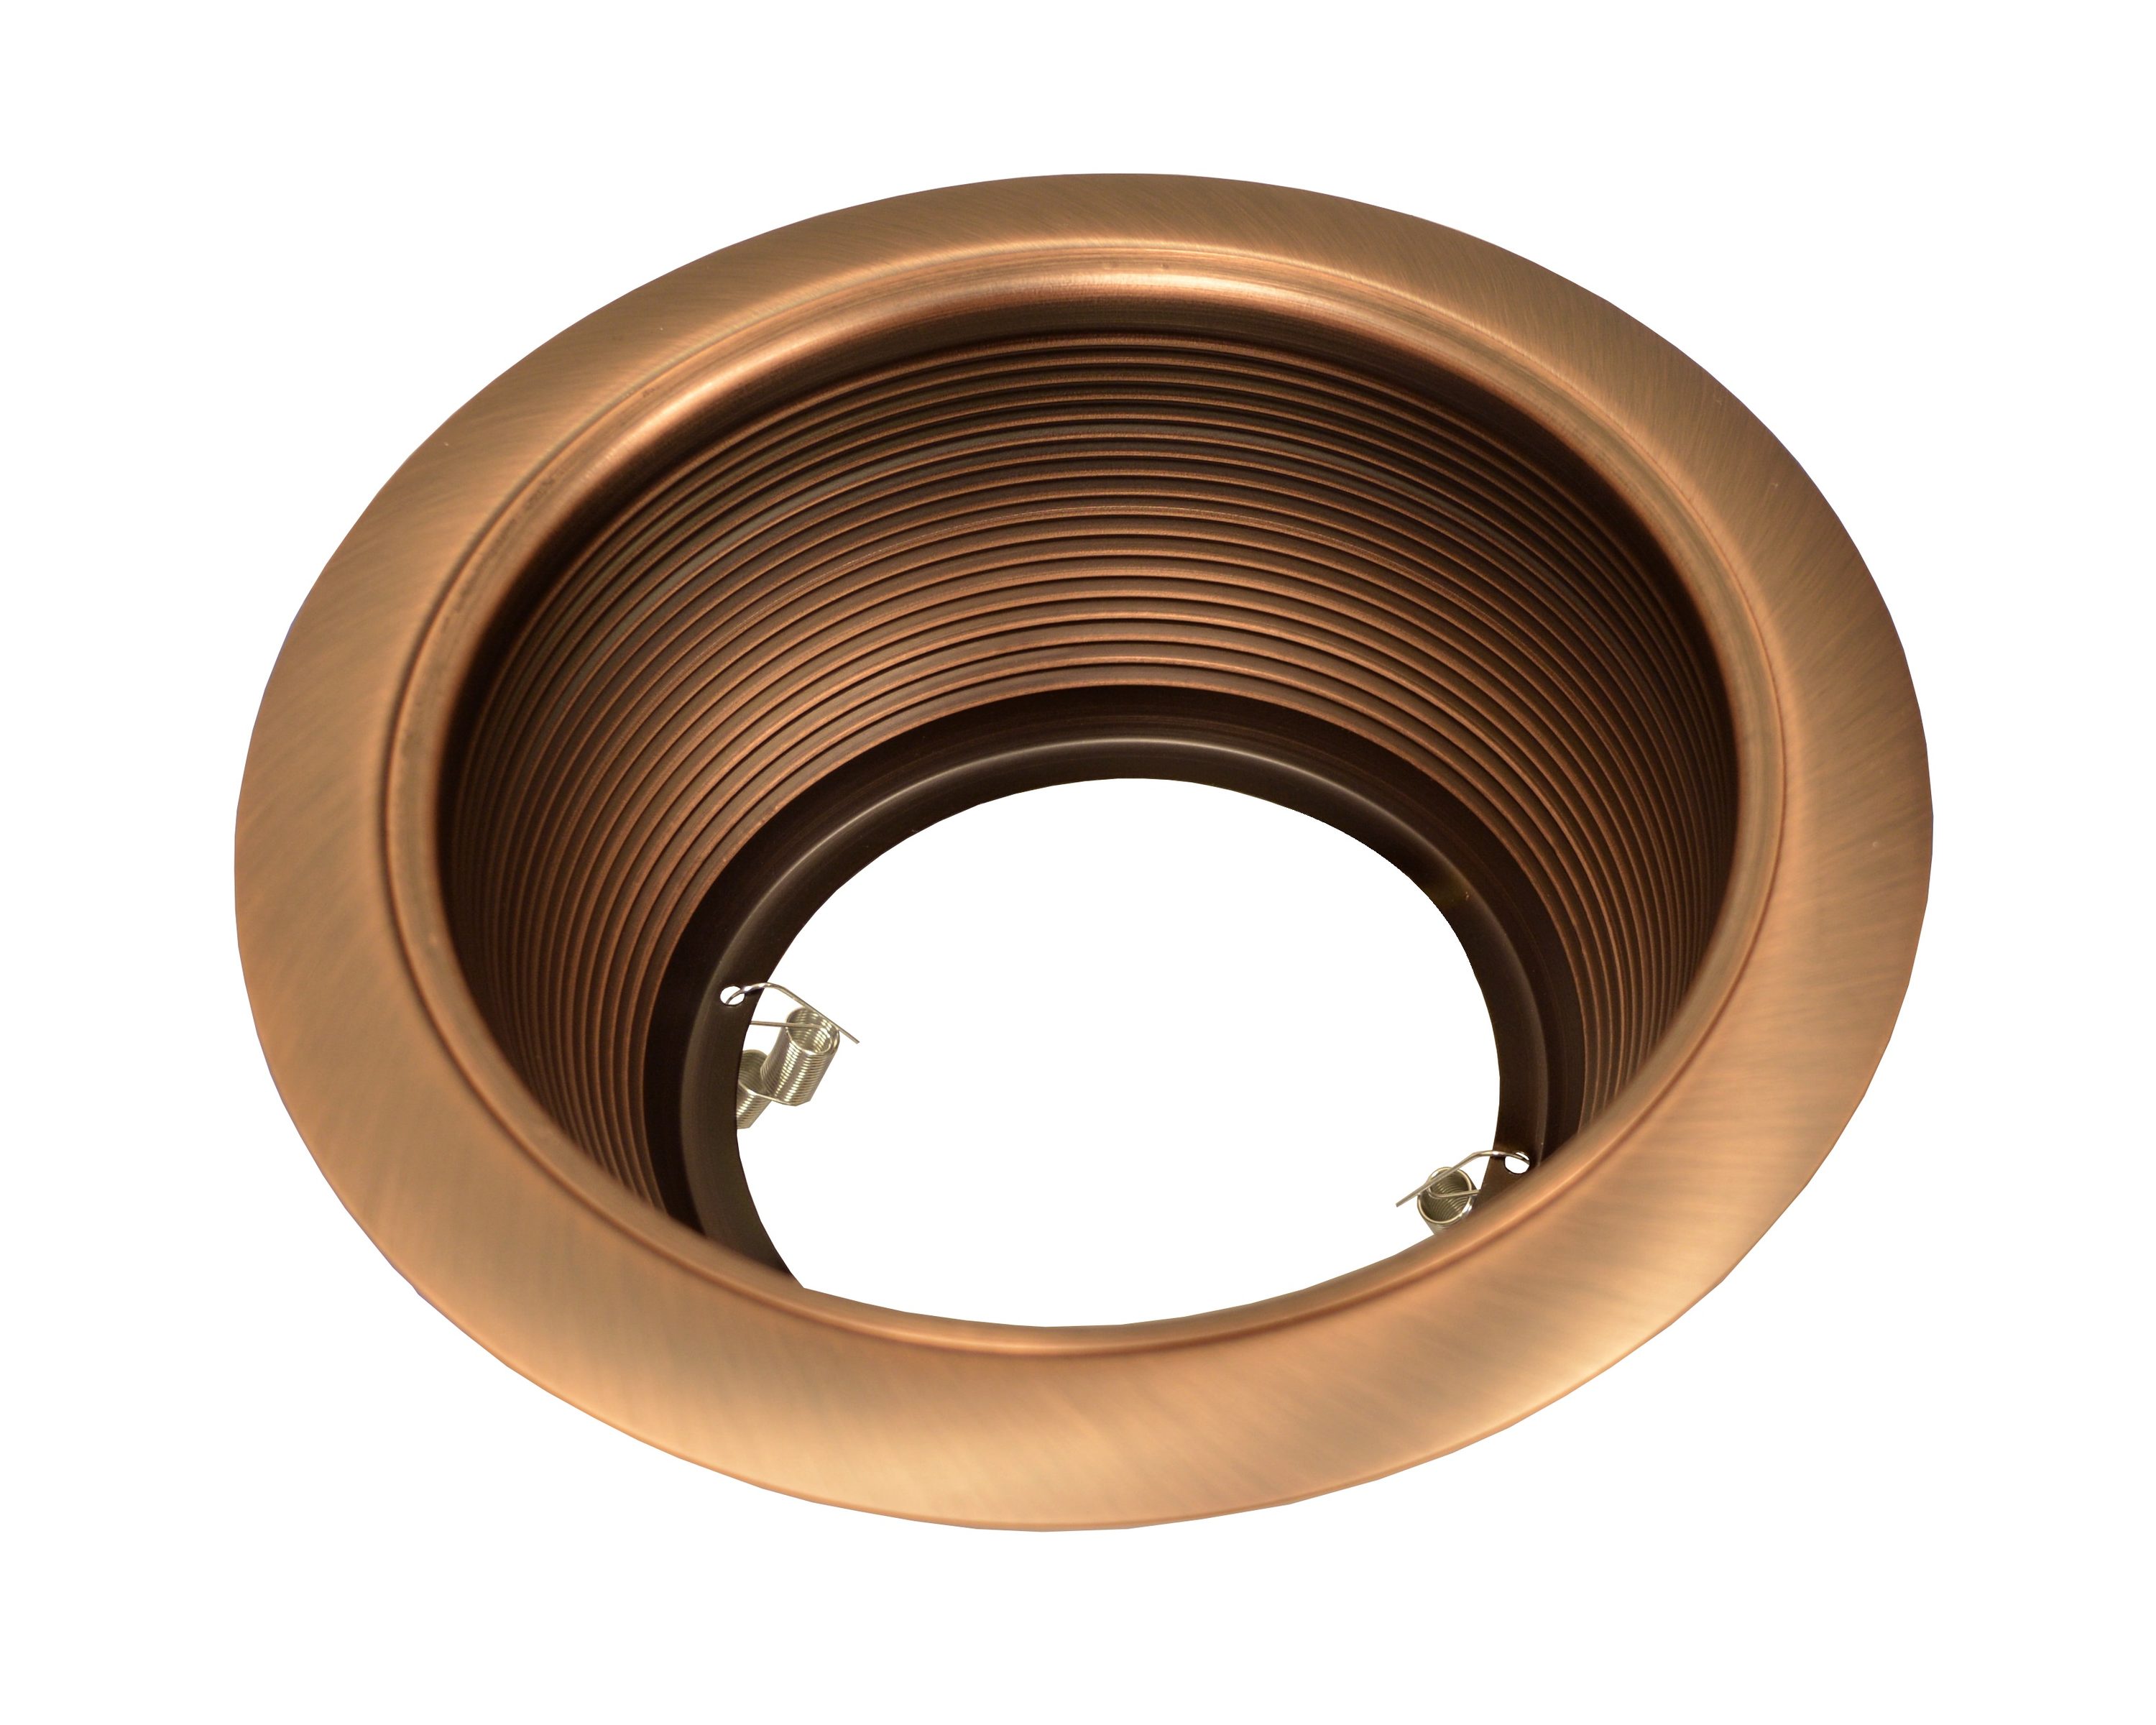 Wren SDR6BW-F 6" Recessed Bronze Dome Housing